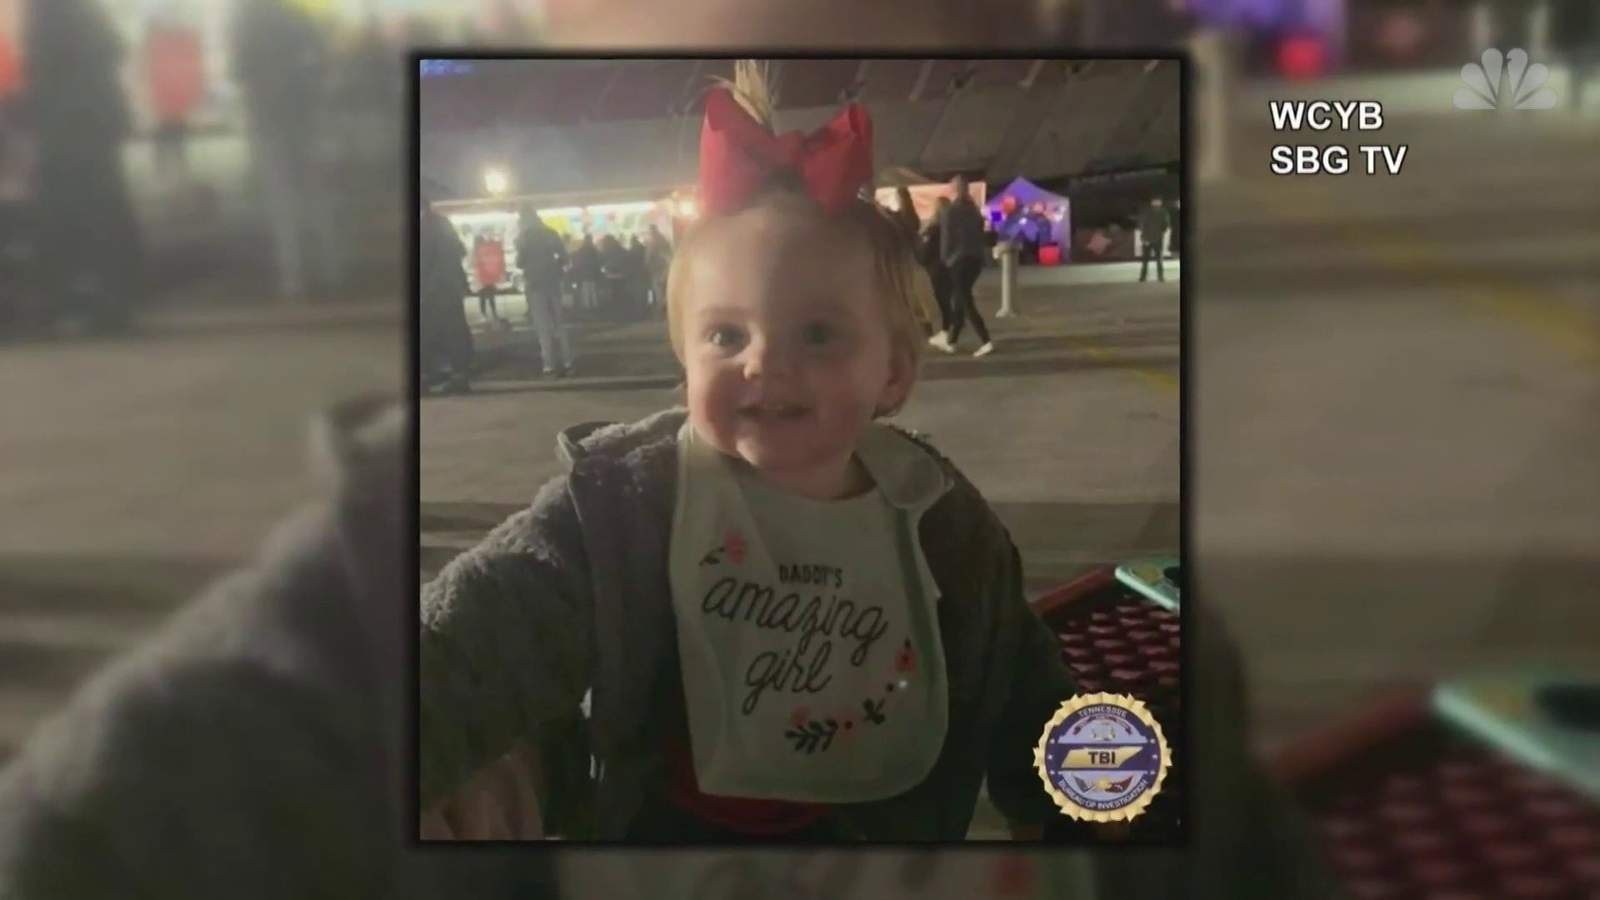 Mom of missing Tennessee toddler: ‘They just kind of disappeared’